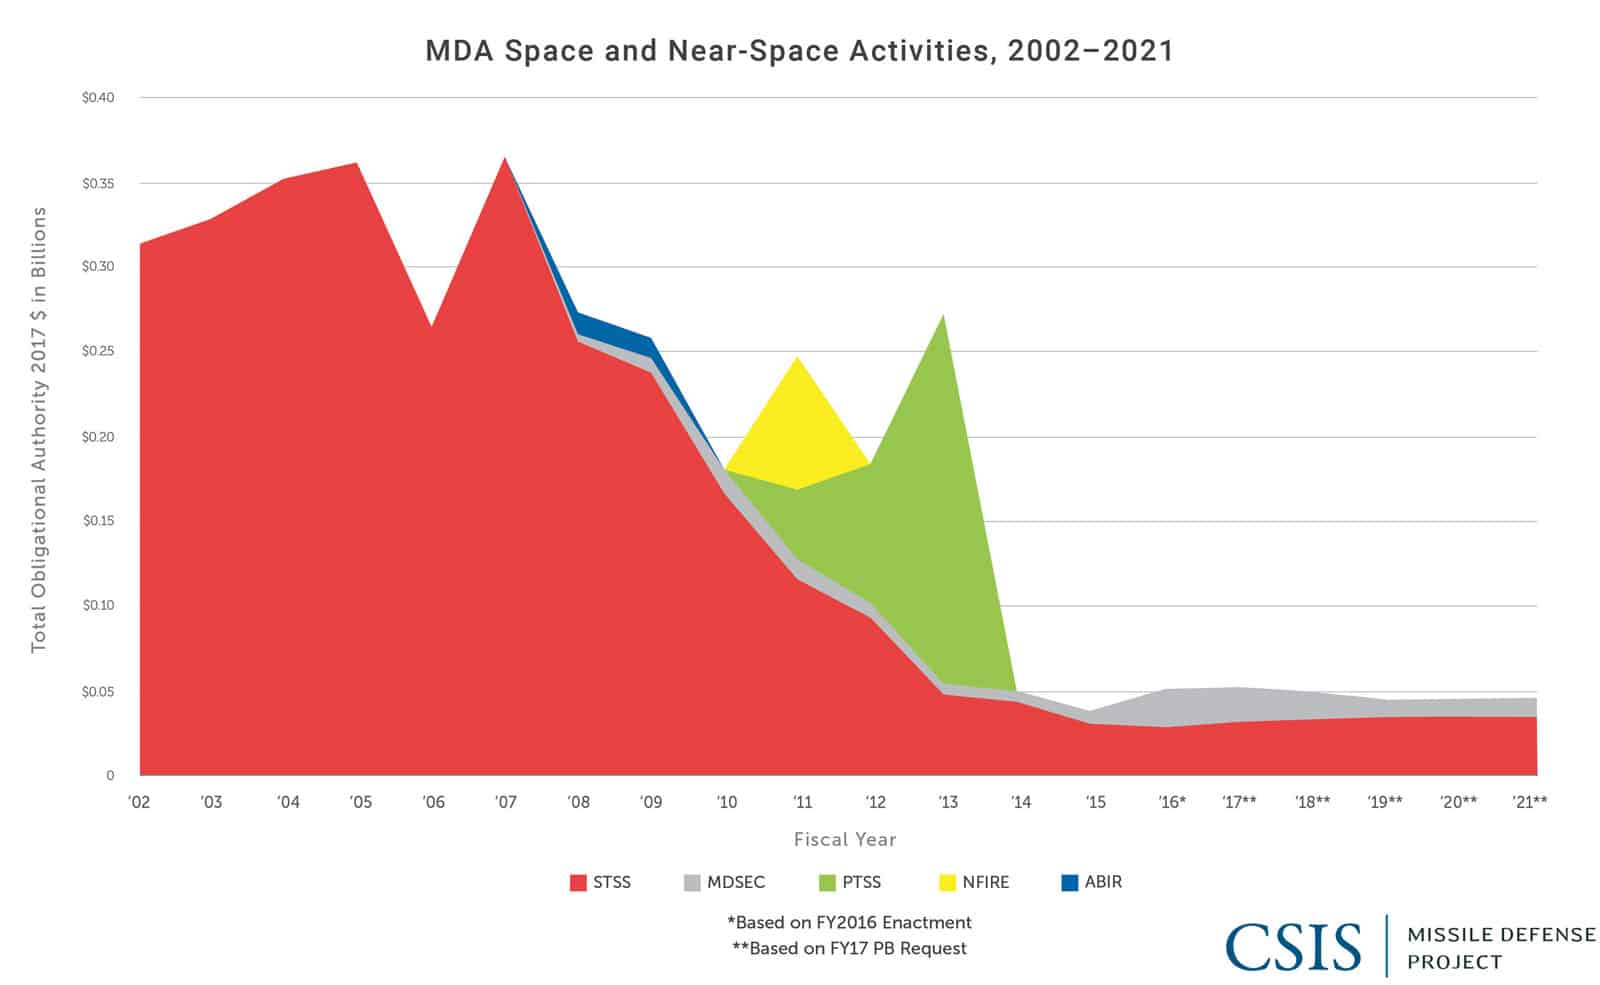 MDA Space and Near-Space Activities Total Obligational Authority